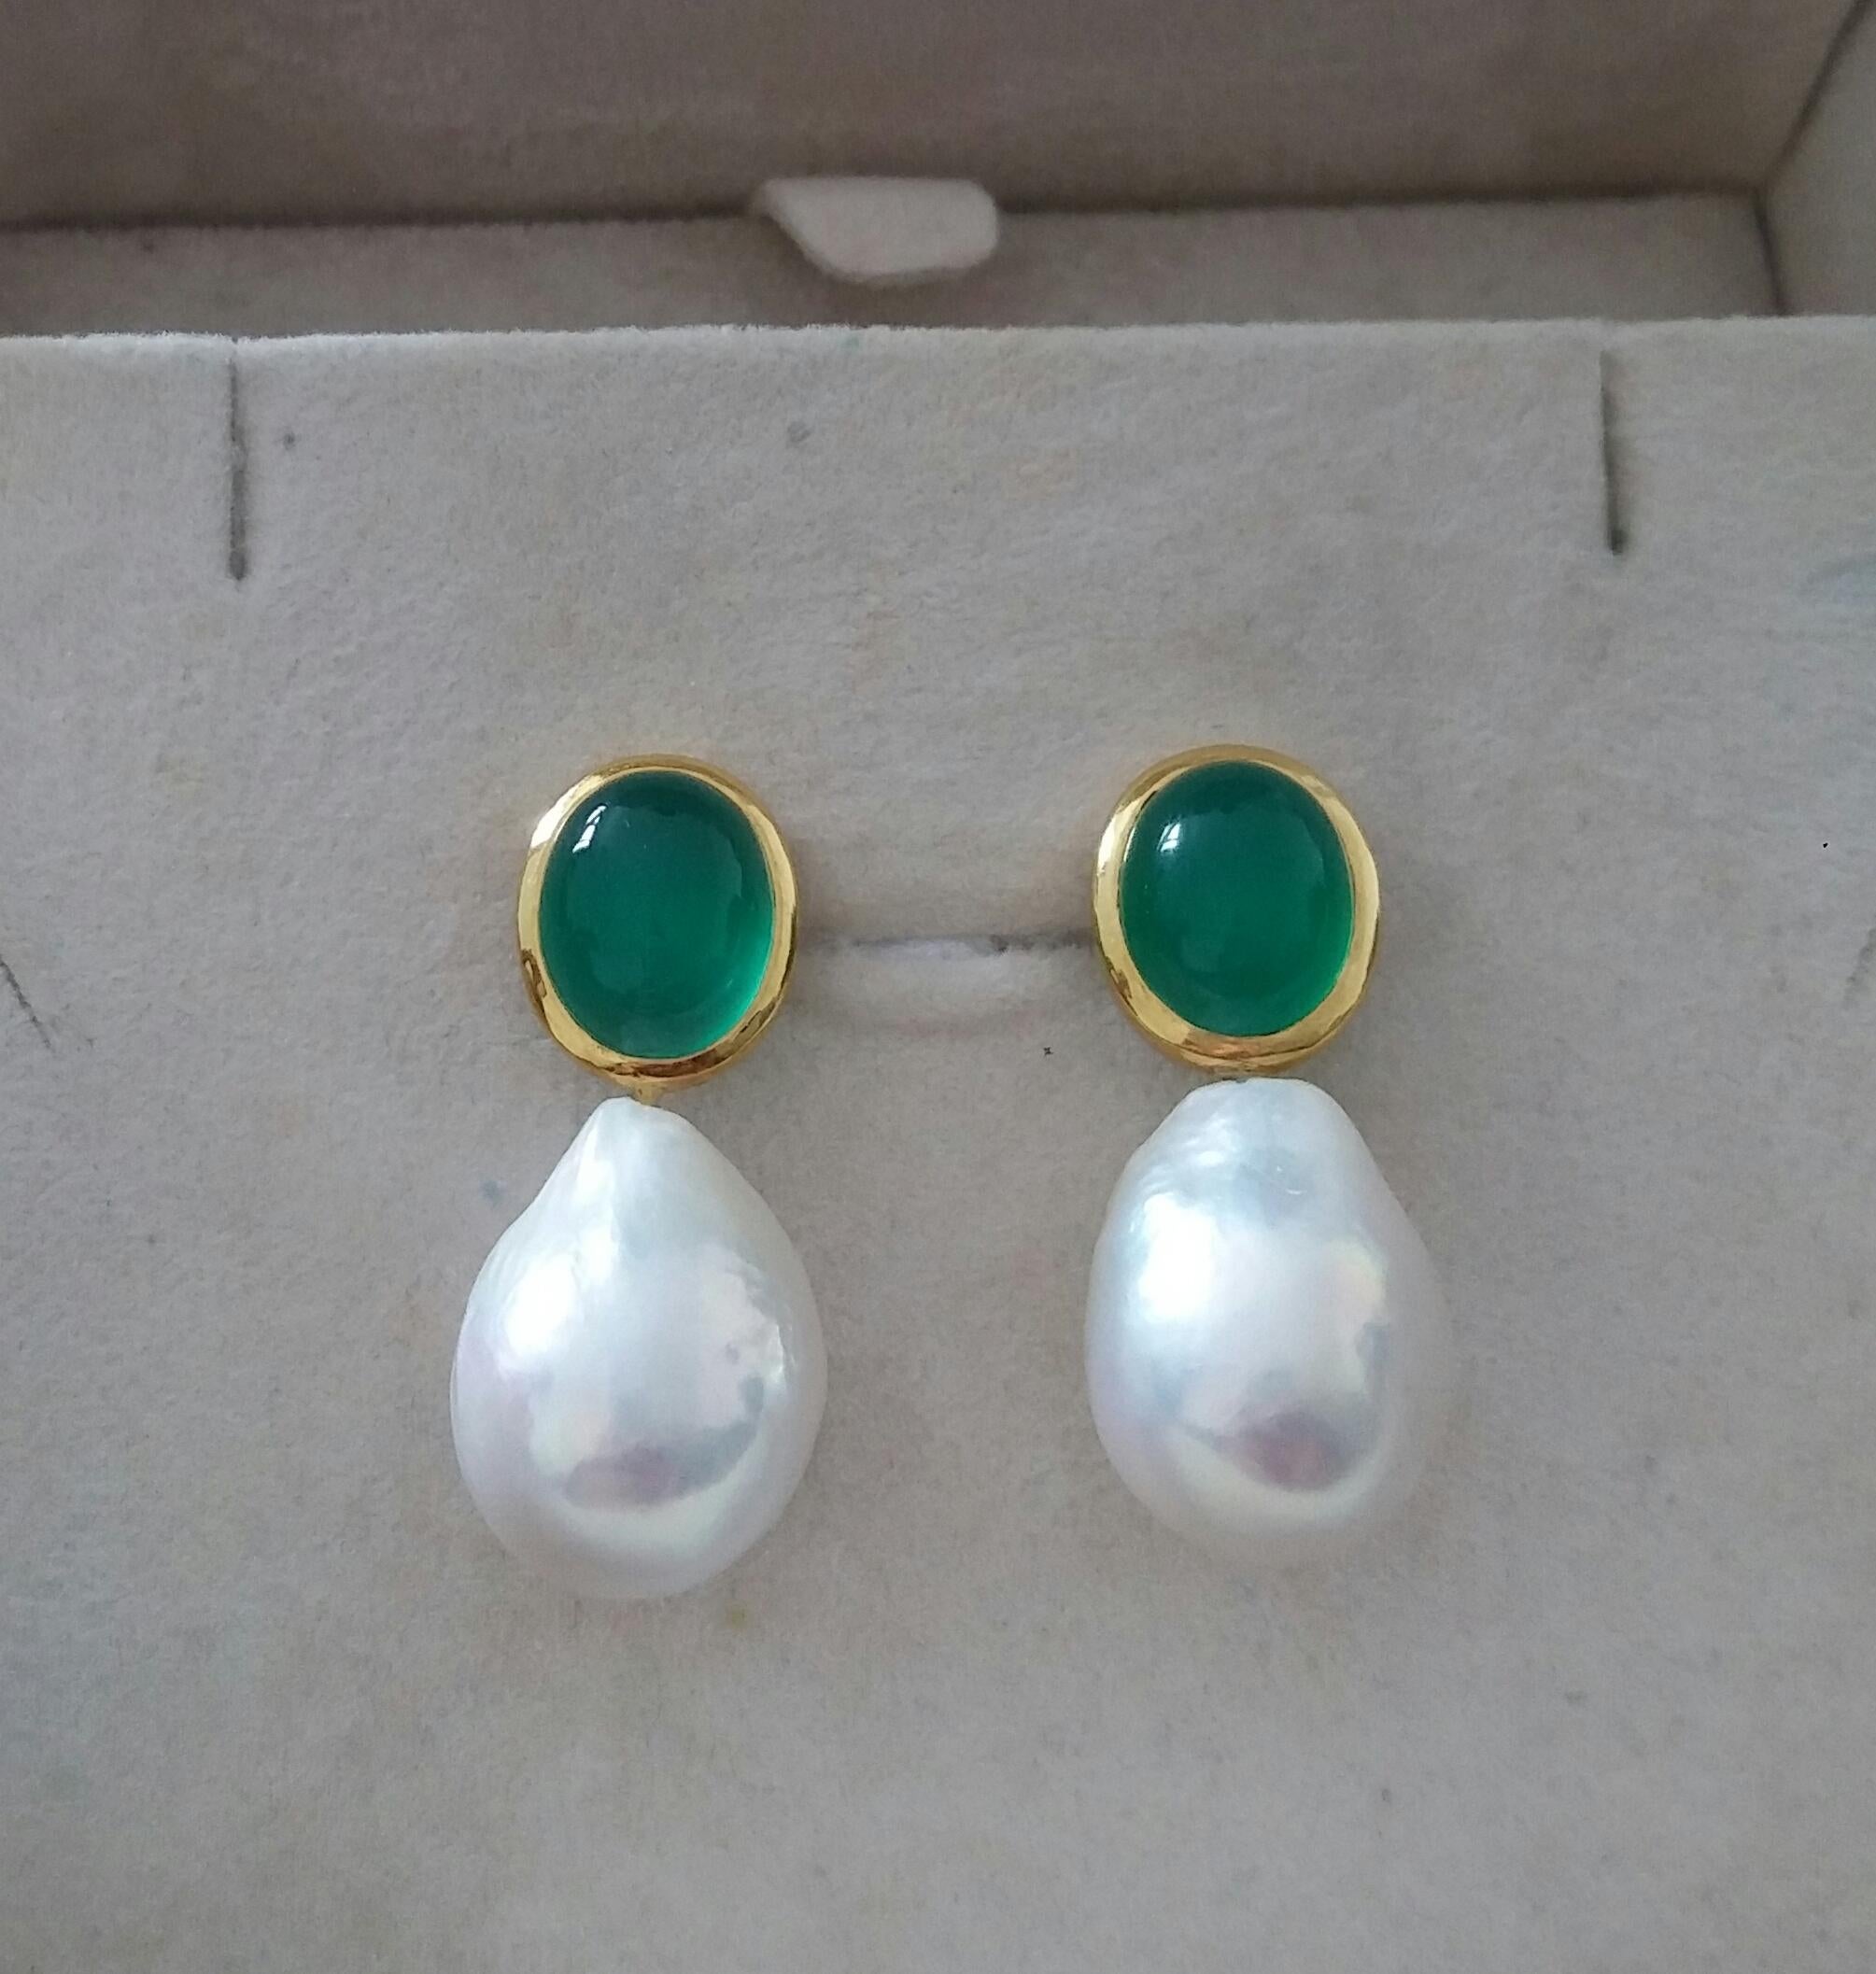 Oval Shape Green Onyx Cabs 14 Kt Yellow Gold Bezel Baroque Pearls Stud Earrings For Sale 2